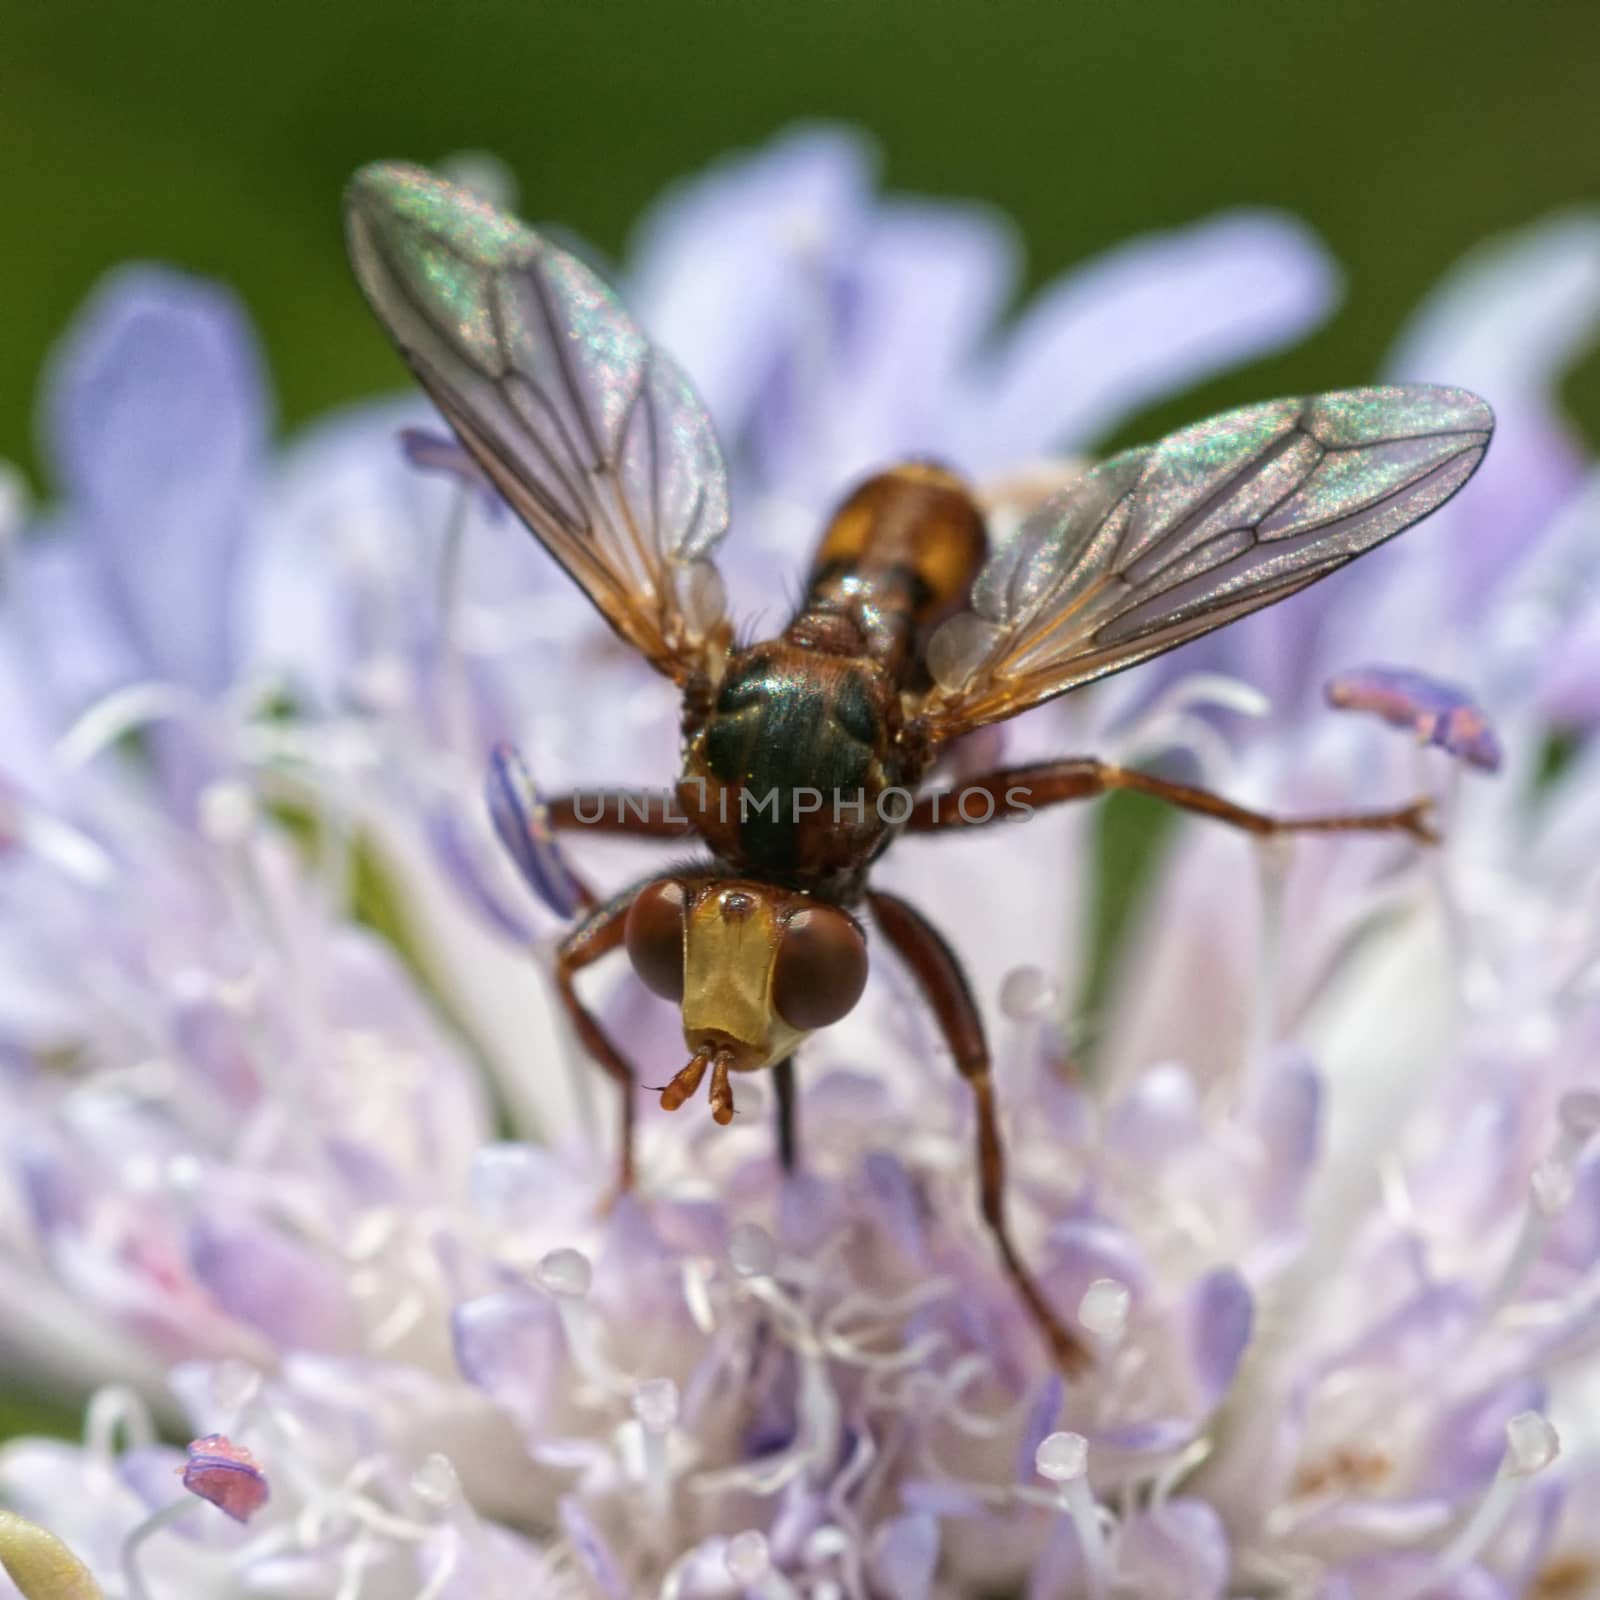 Fly sitting on a violet flower with blurred background